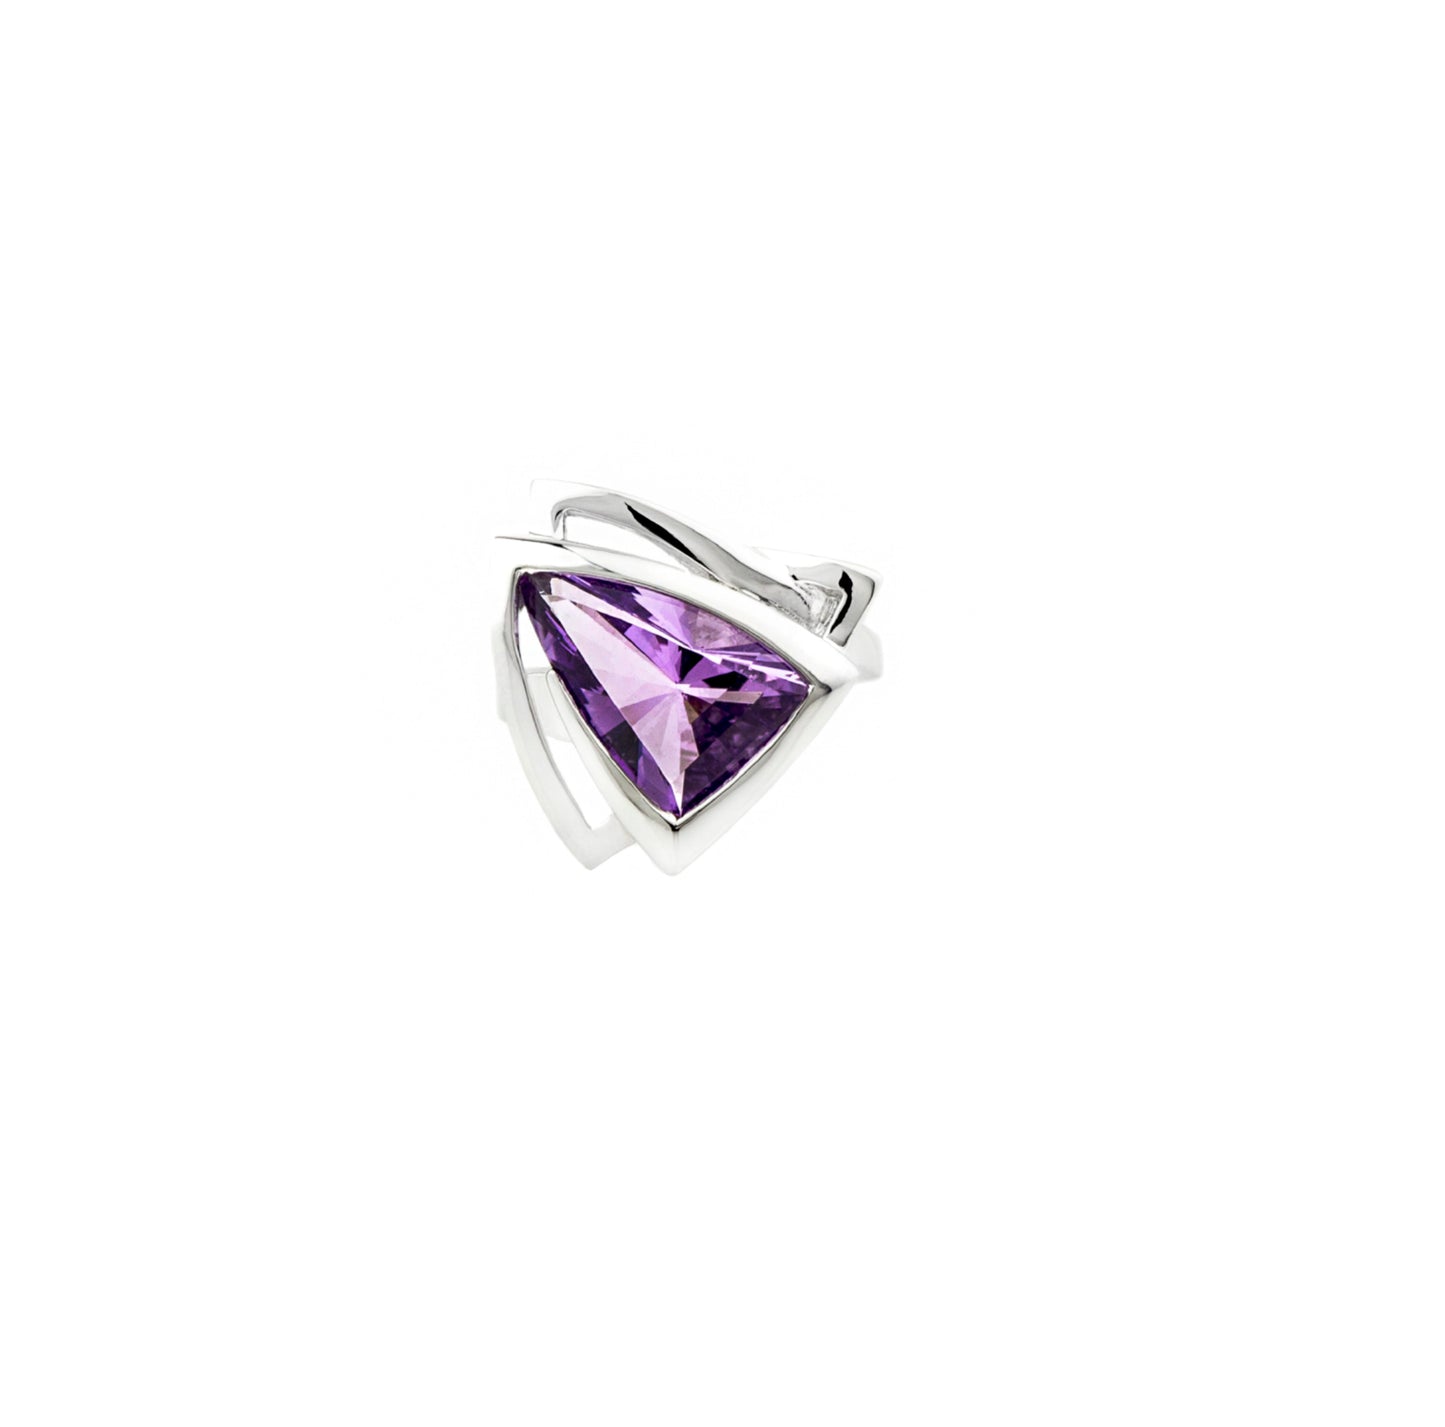 Amethyst Trillion Cut Rhodium Plated Sterling Silver Ring - Twisted Earth Artistry